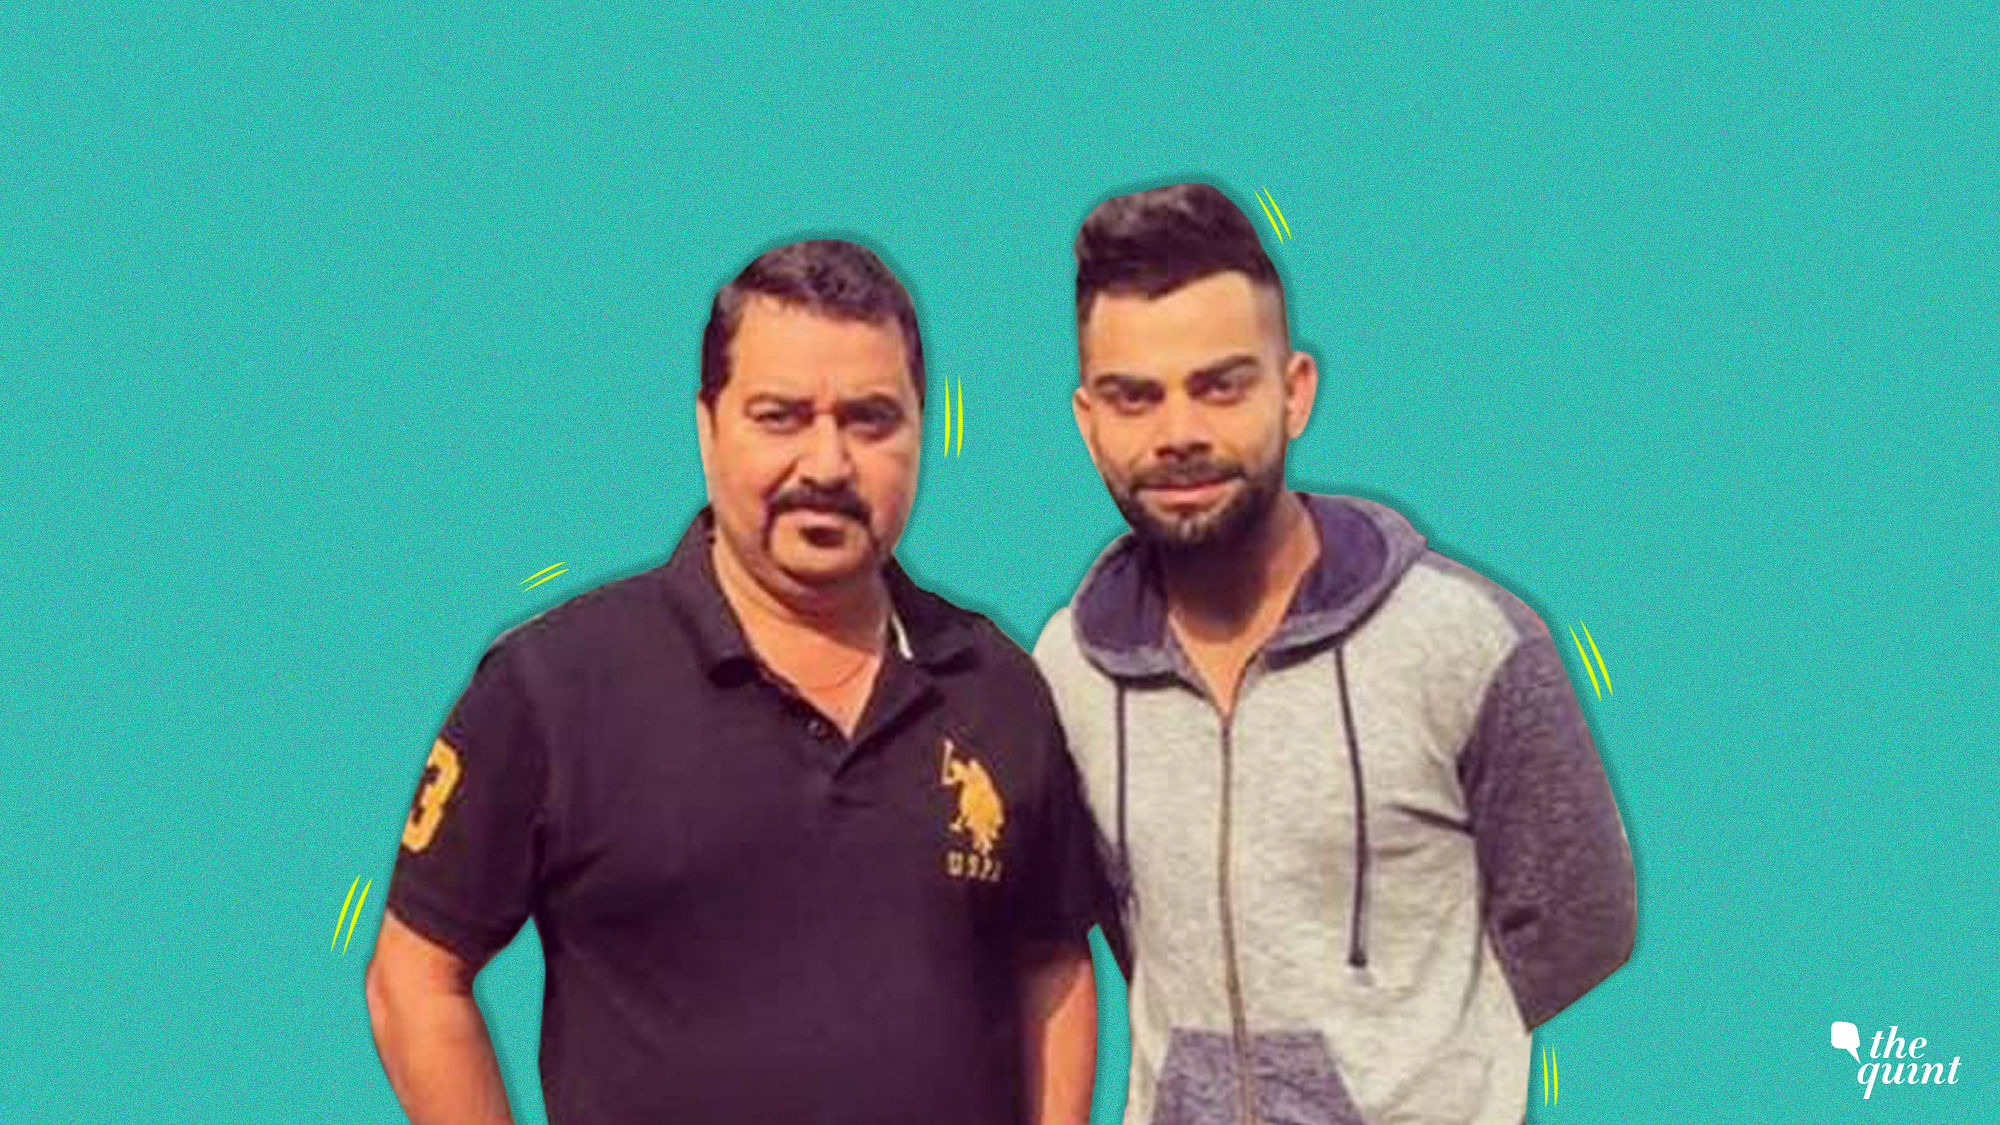 Having groomed India’s captain in his formative years and remained his close confidant over many more, Rajkumar is an integral part of Virat Kohli’s support system